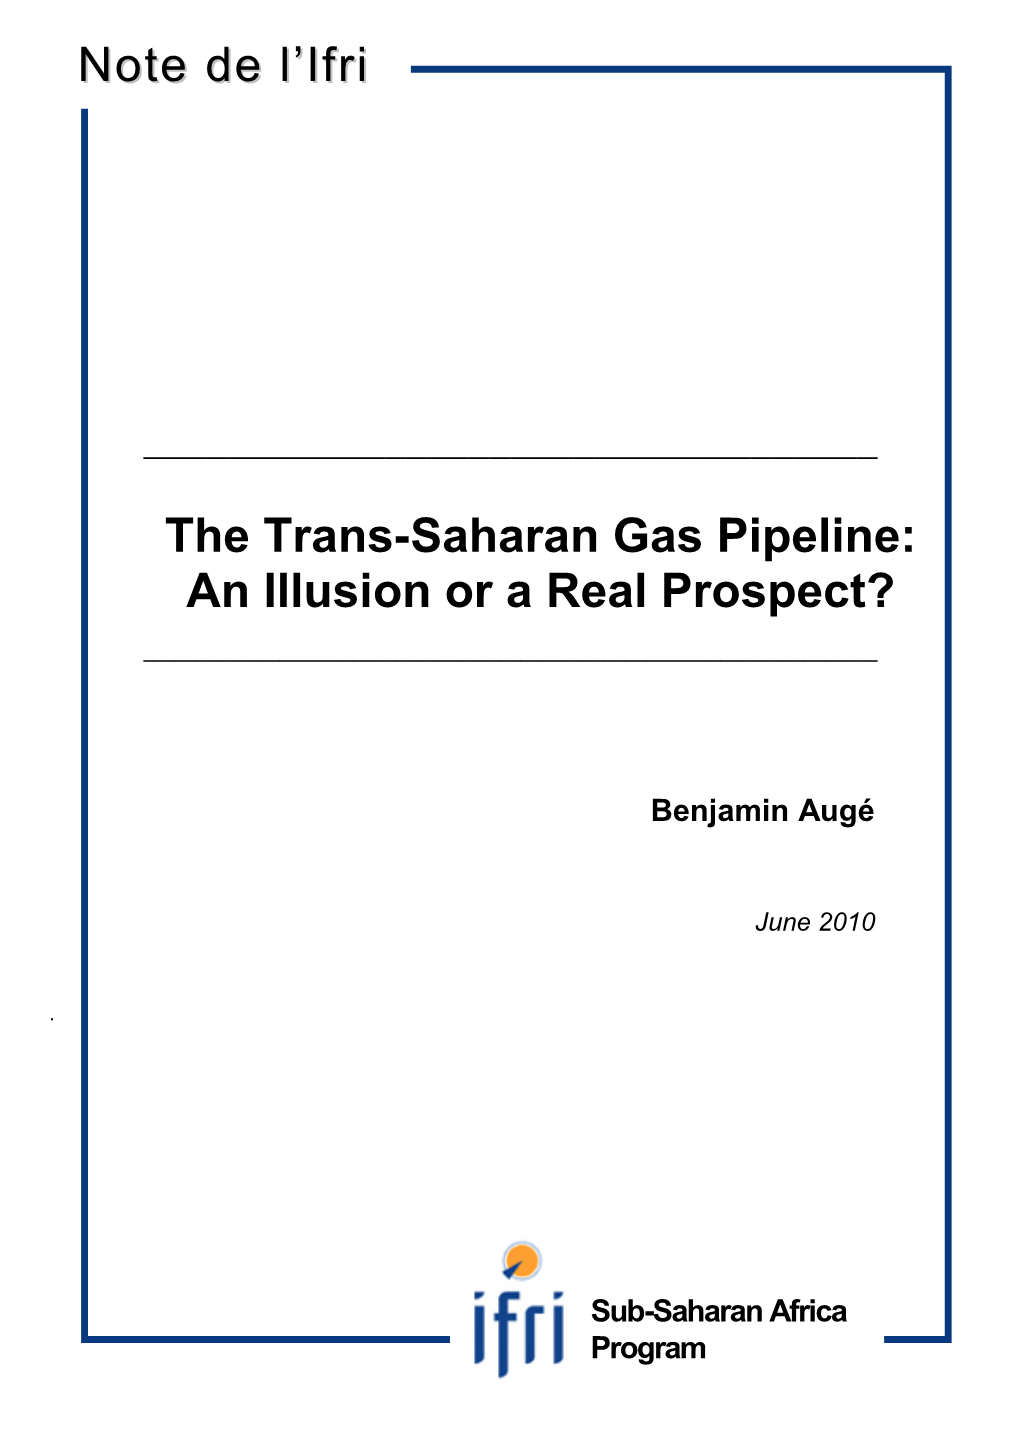 The Trans-Saharan Gas Pipeline: an Illusion Or a Real Prospect?